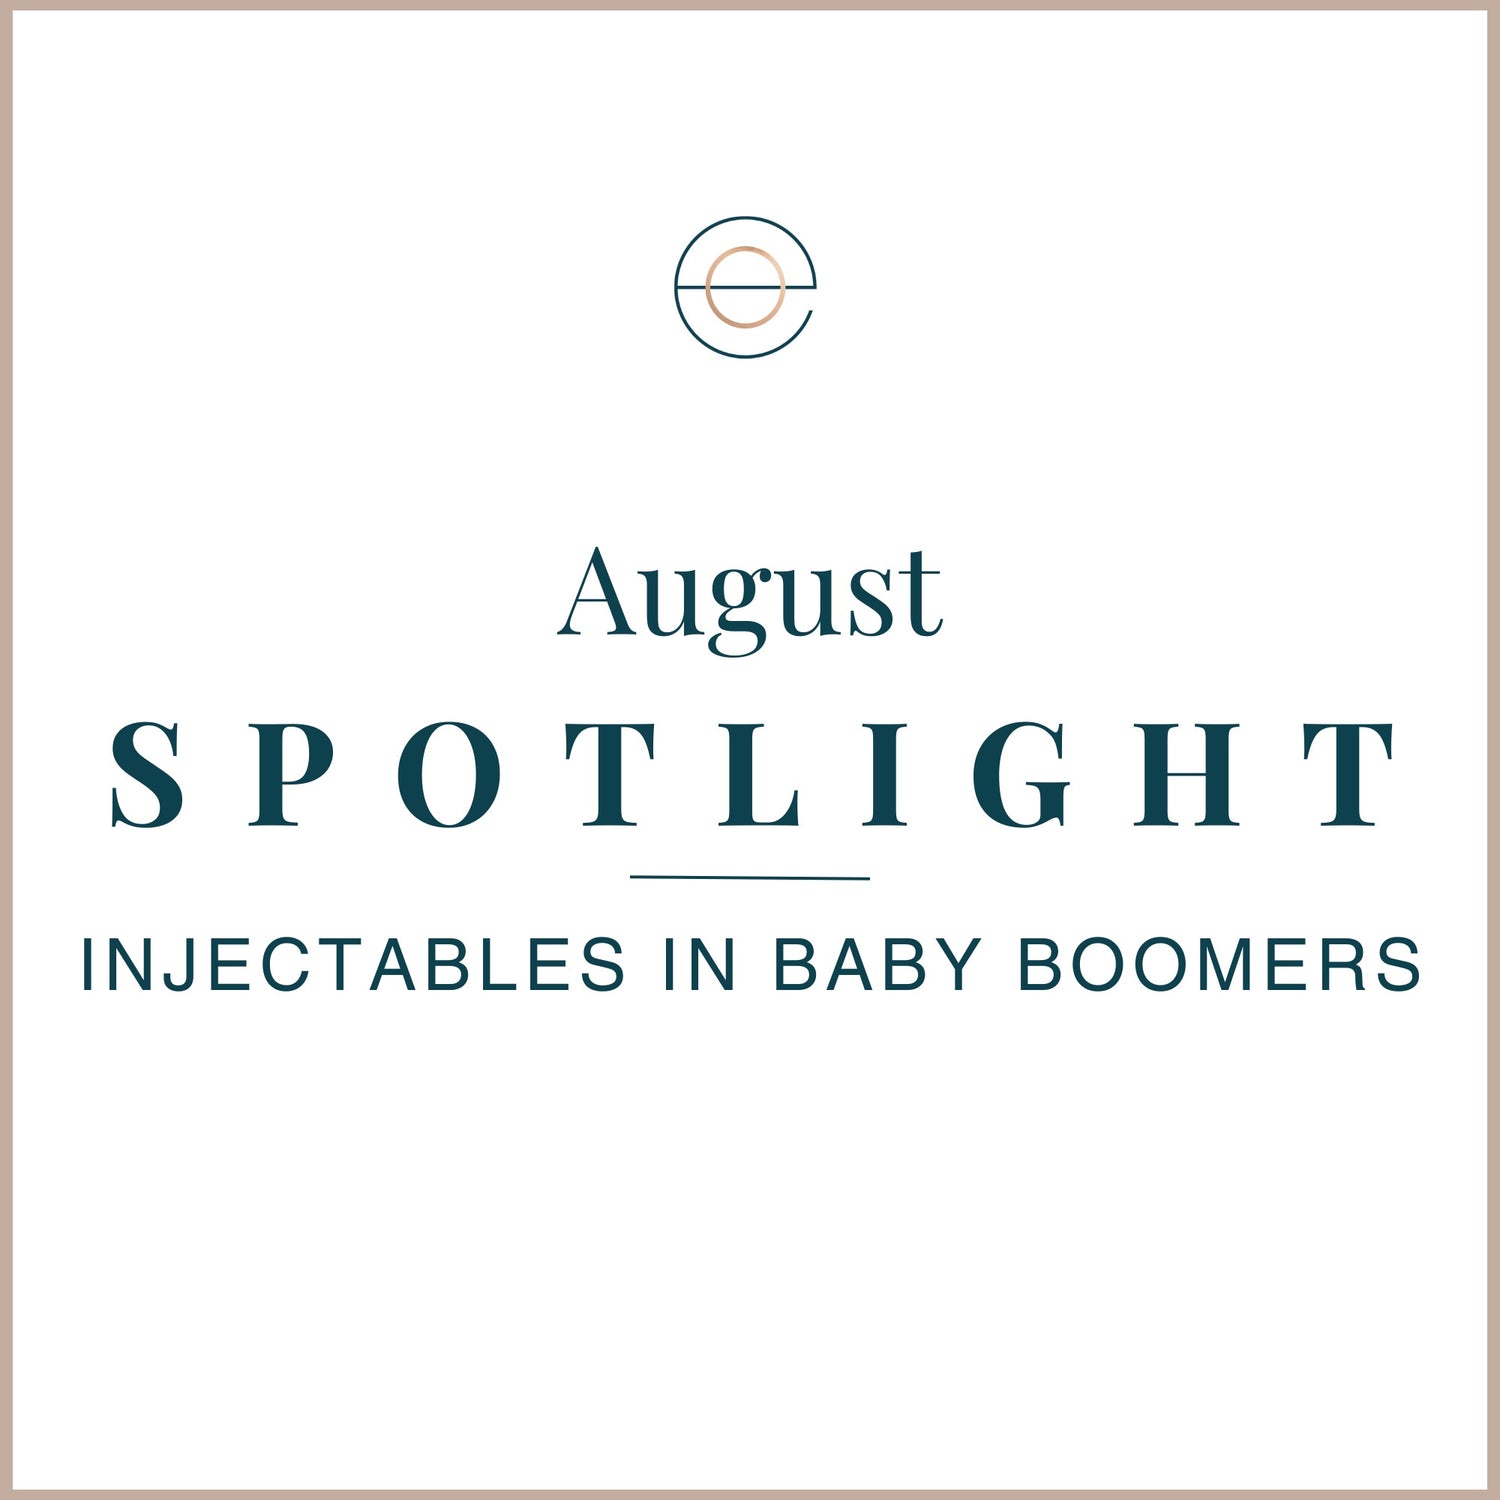 Injectables in Baby Boomers